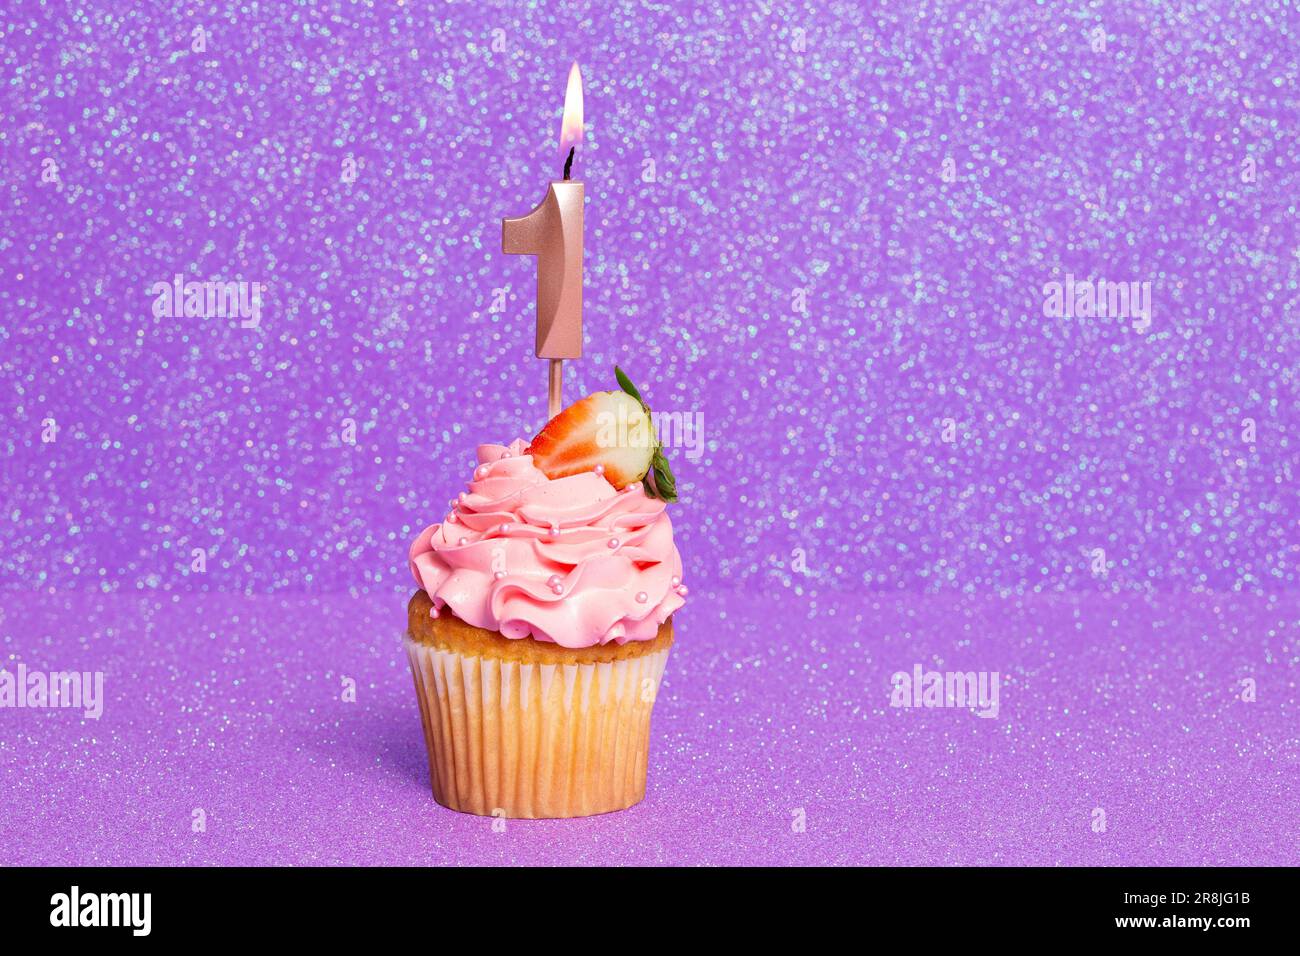 Cupcake With Number For Celebration Of Birthday Or Anniversary; Number 1 Stock Photo